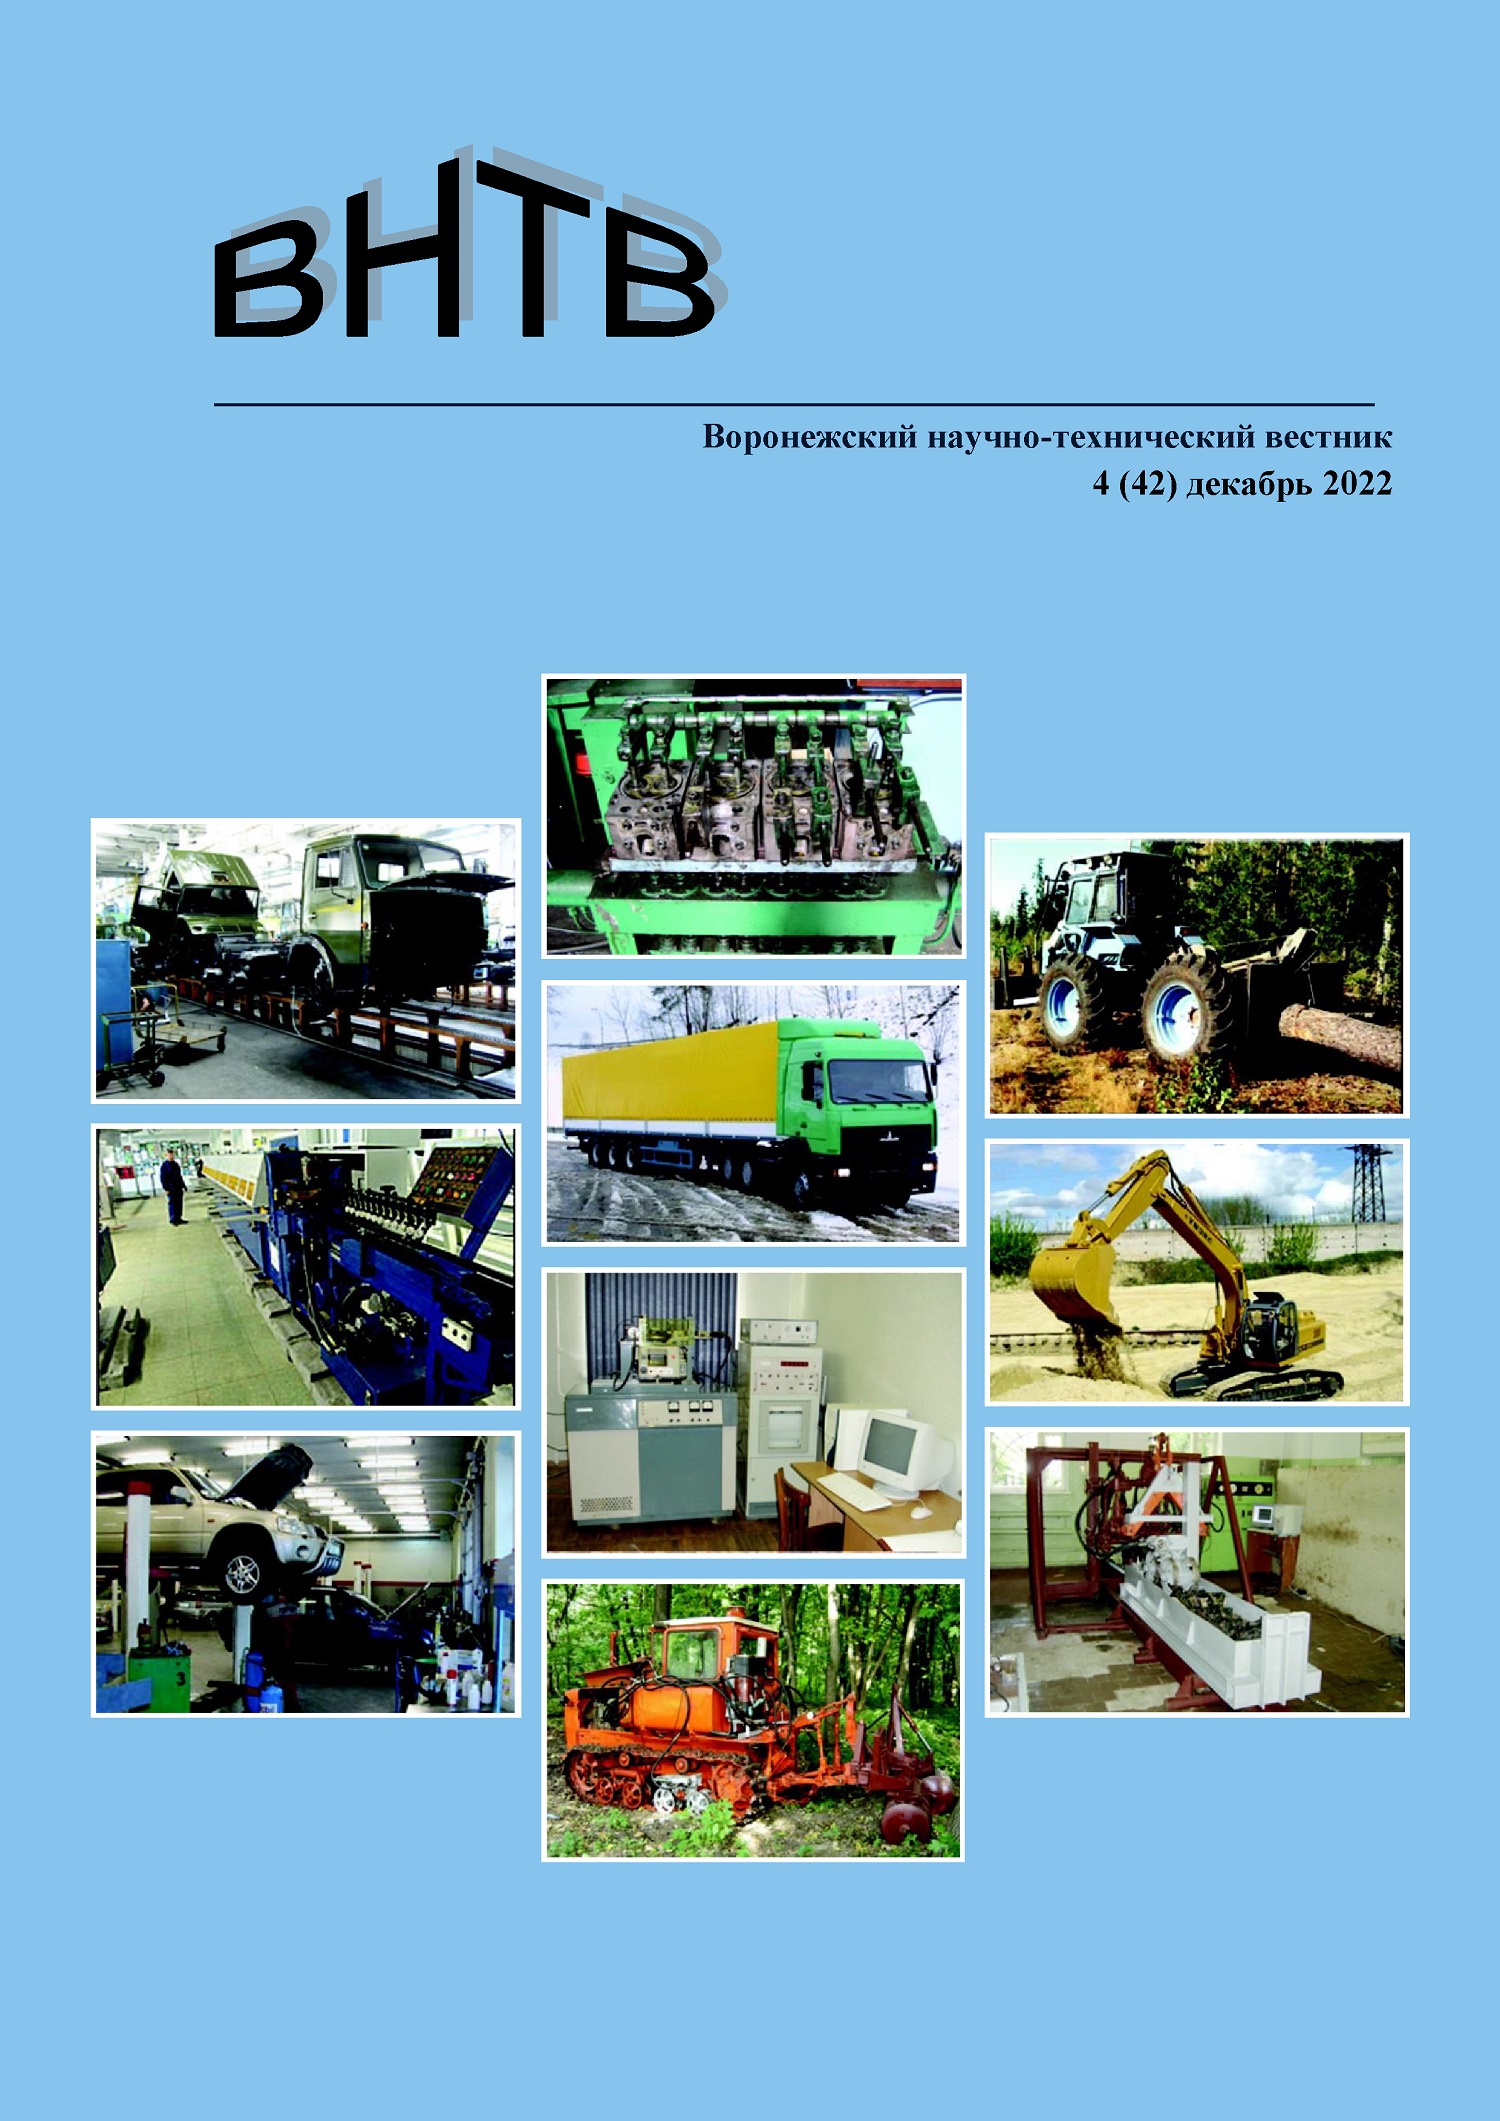                         STATISTICAL EVALUATION  OF THE EFFECTIVENESS OF MAINTENANCE AND REPAIR  OF TRAINING VEHICLES
            